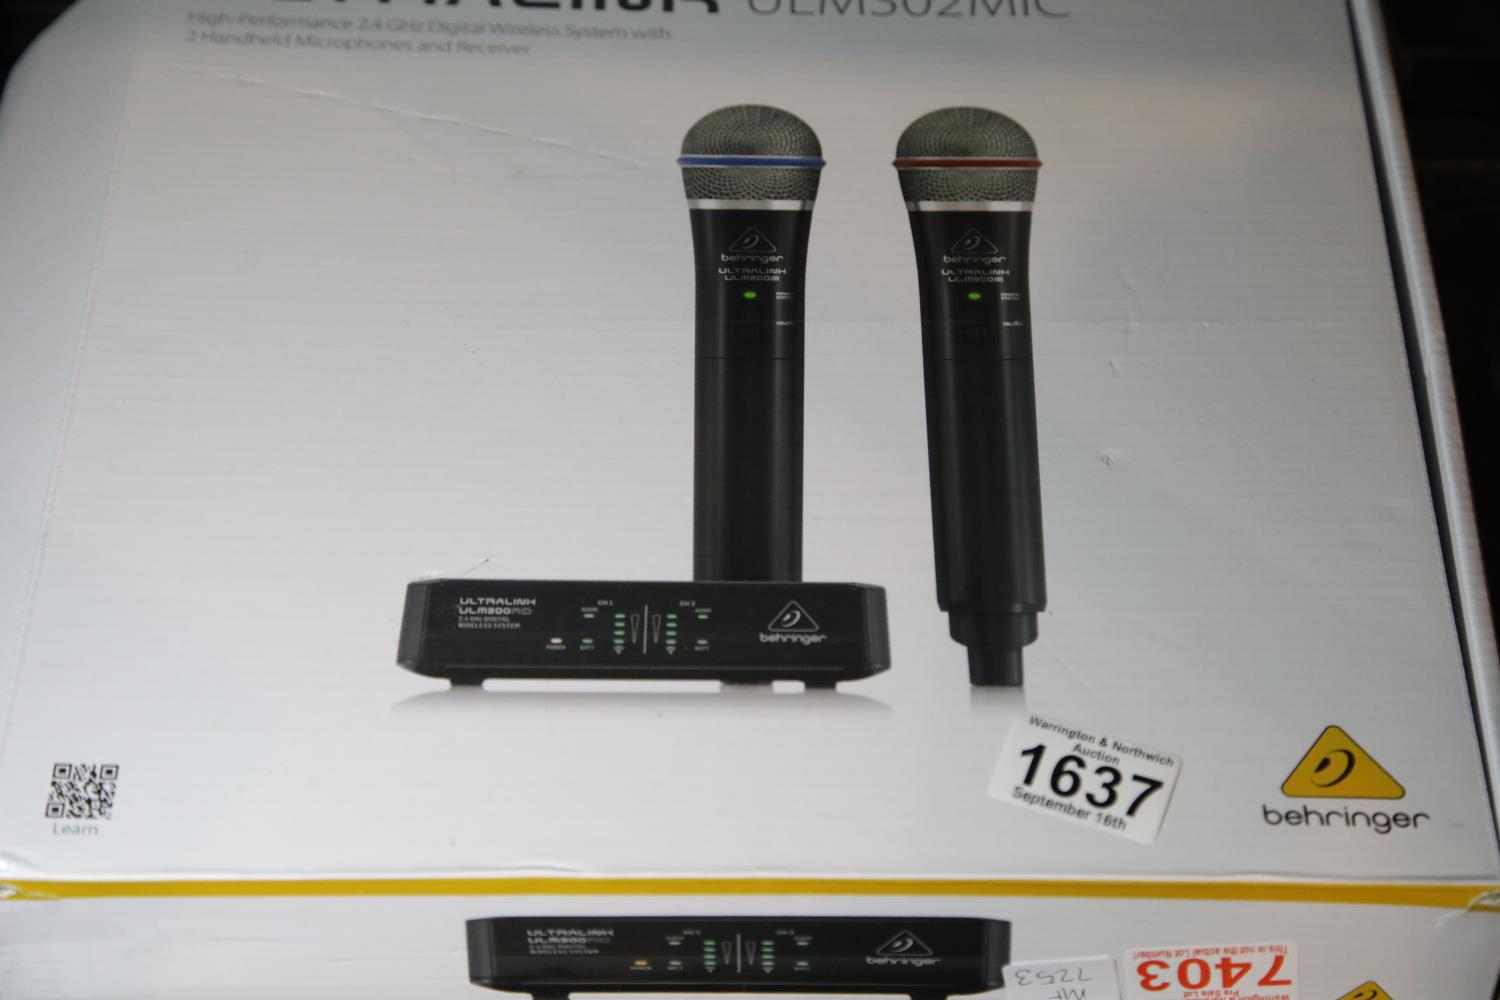 Behringer ULM 302 MIC high performance wireless system with two microphones, wifi box not working.